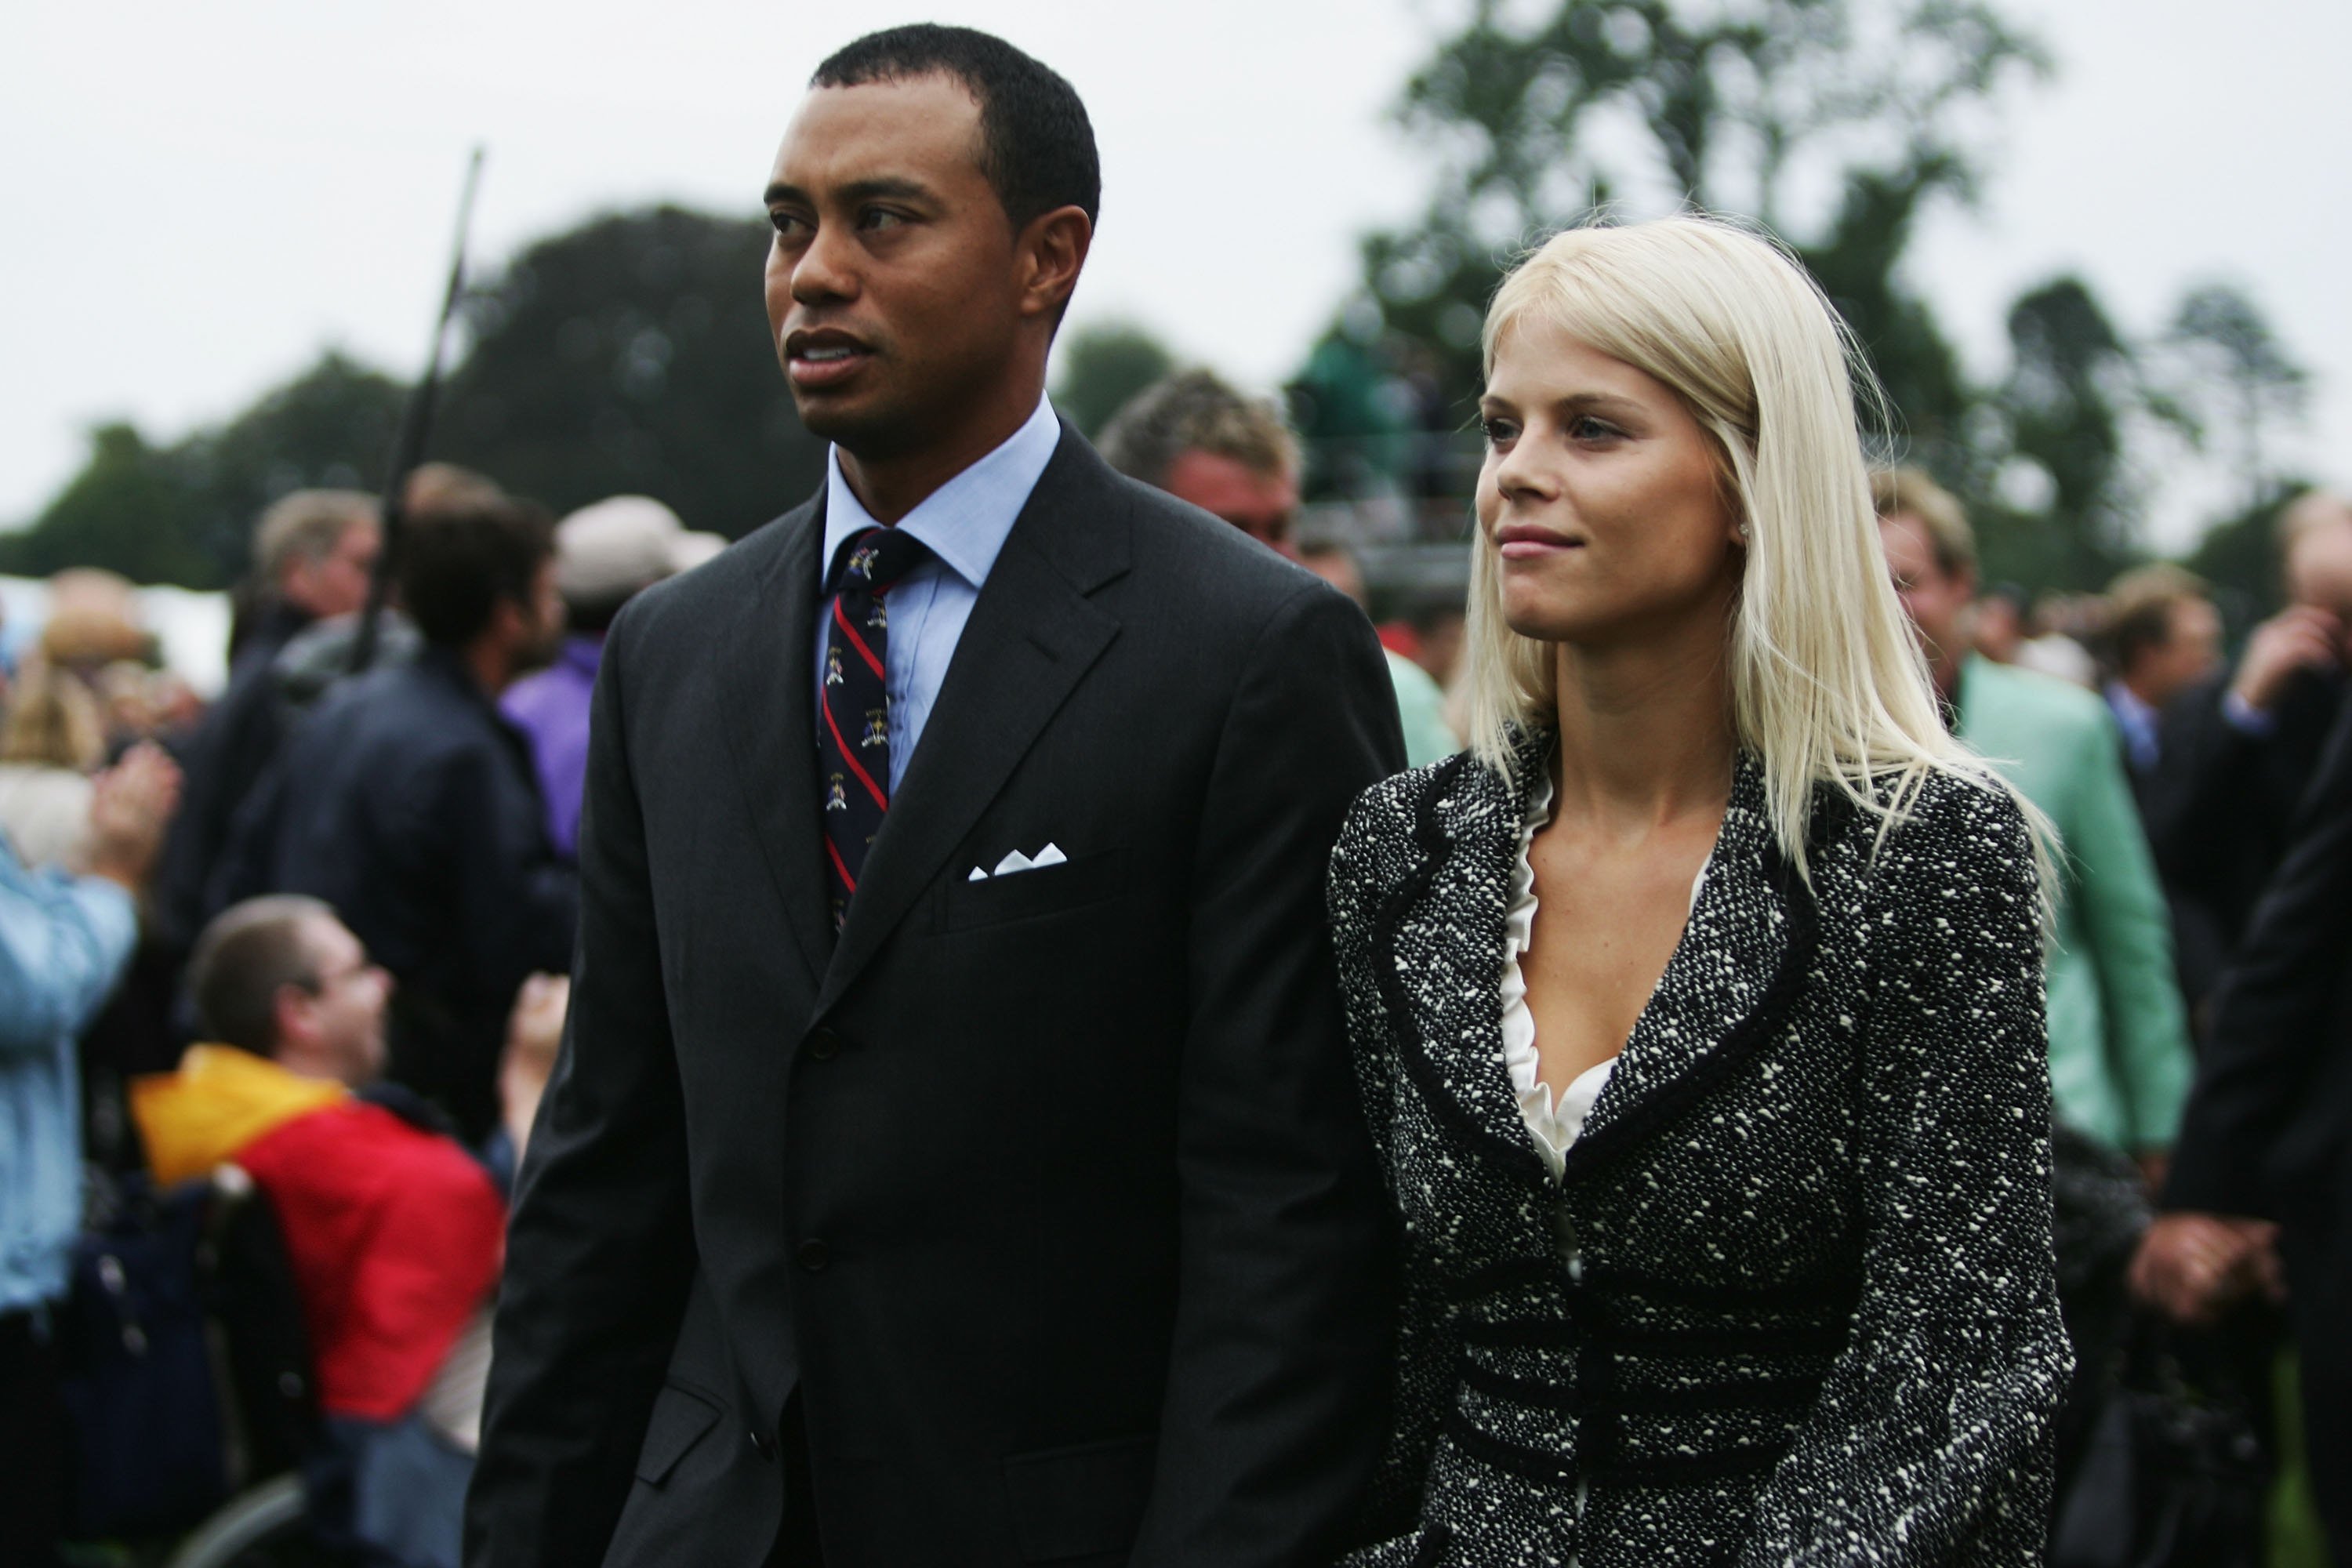 Tiger Woods and Elin Nordegren on during the Opening Ceremony of the 2006 Ryder Cup at The K Club on September 21, 2006 in Straffan, Co. Kildare, Ireland. | Source: Getty Images